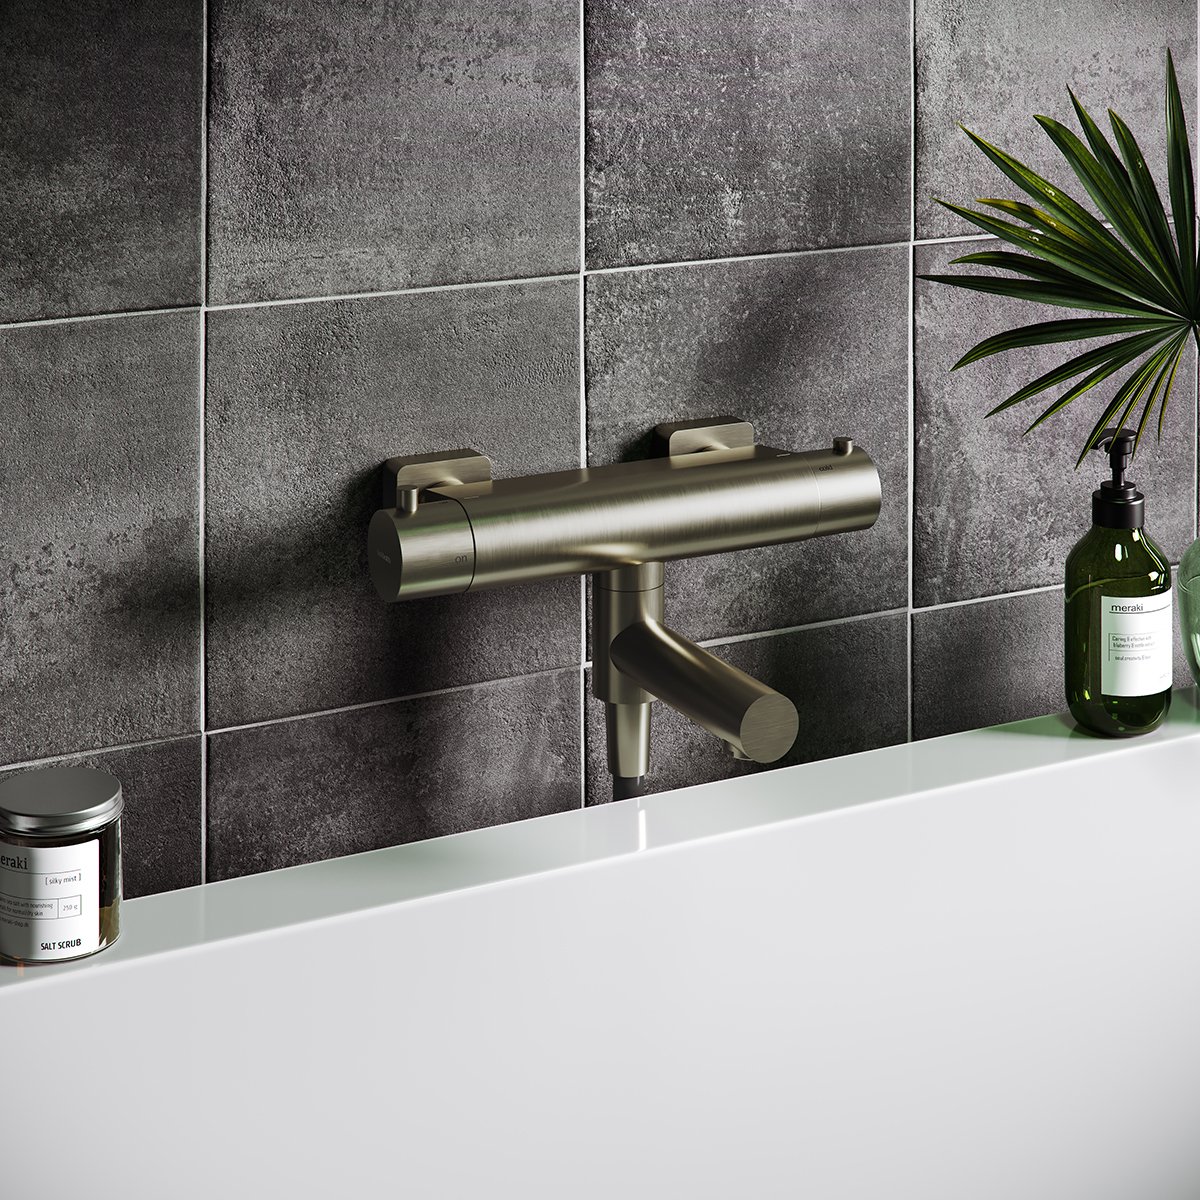 Lifestyle CG Images for Bathroom Products